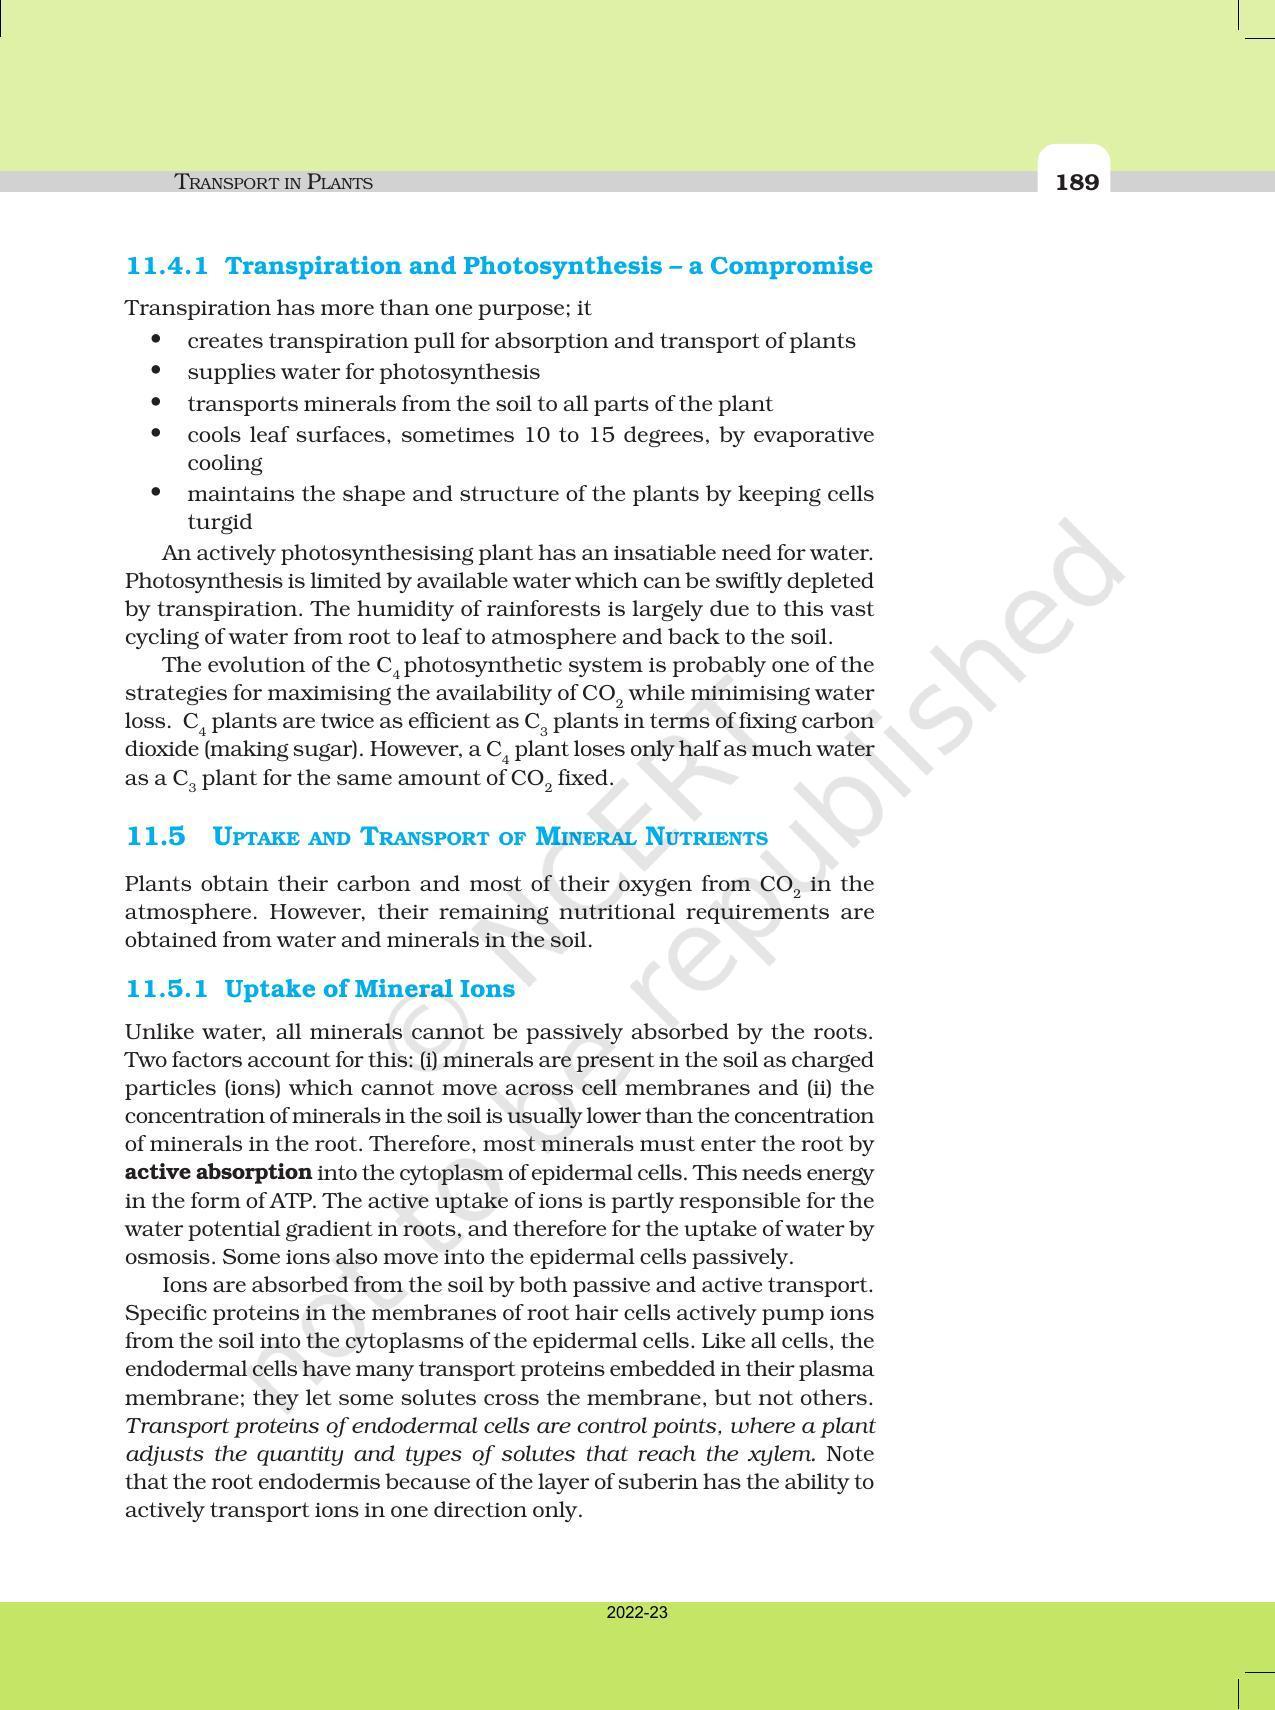 NCERT Book for Class 11 Biology Chapter 11 Transport in Plants - Page 17